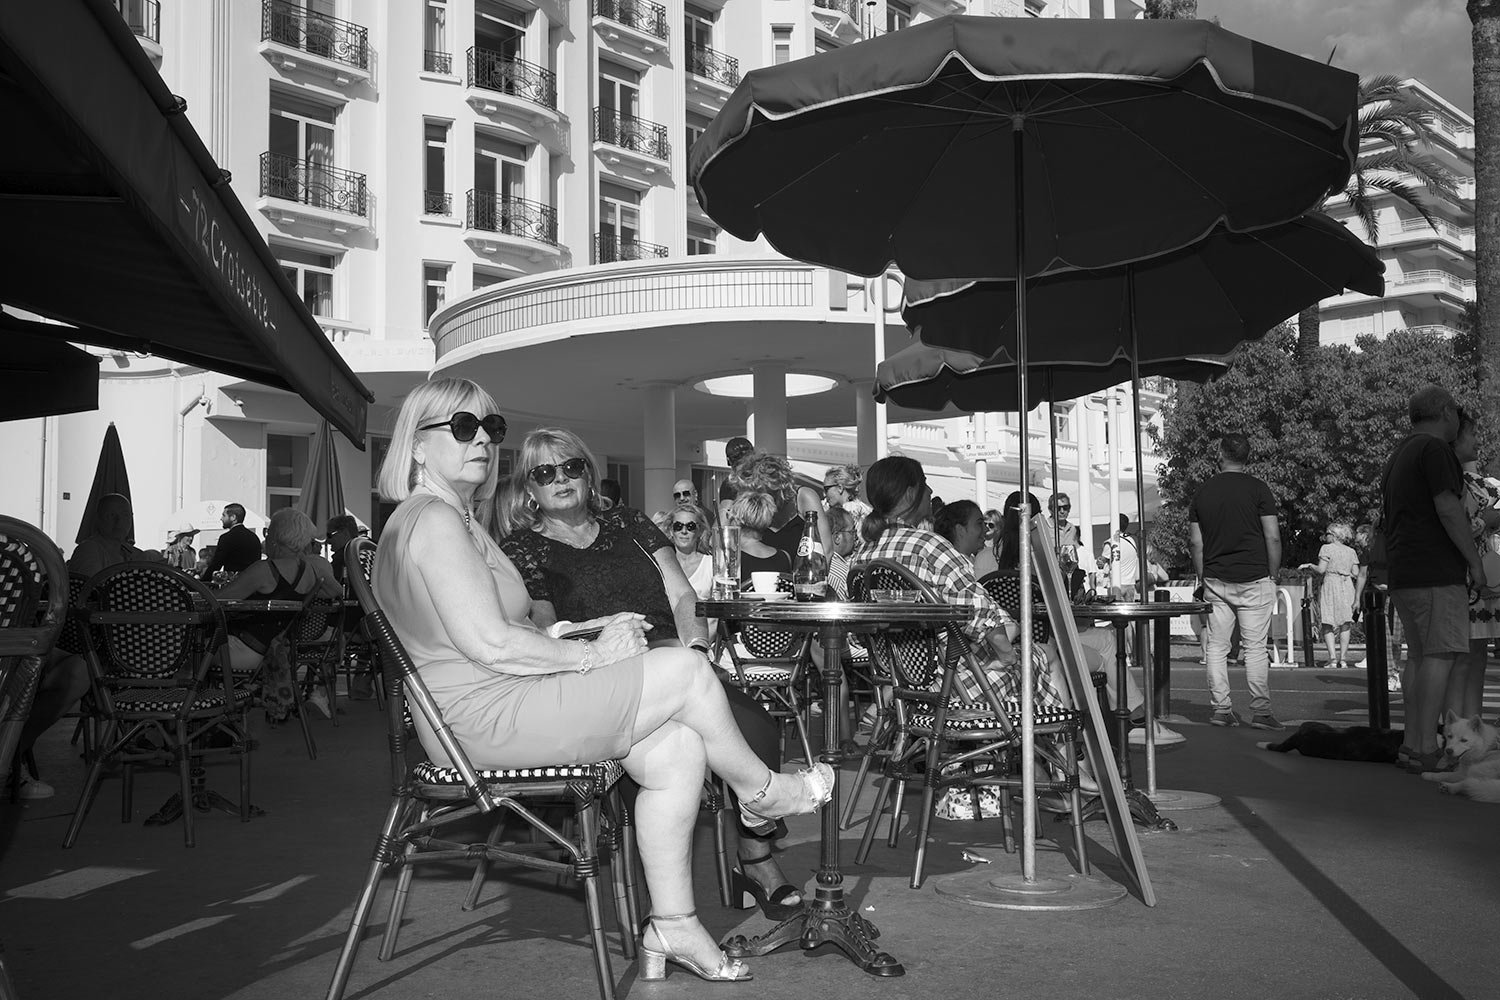  People sit at a cafe on the Croisette during the 75th international film festival, Cannes, southern France, Tuesday, May 24, 2022. (AP Photo/Petros Giannakouris) 